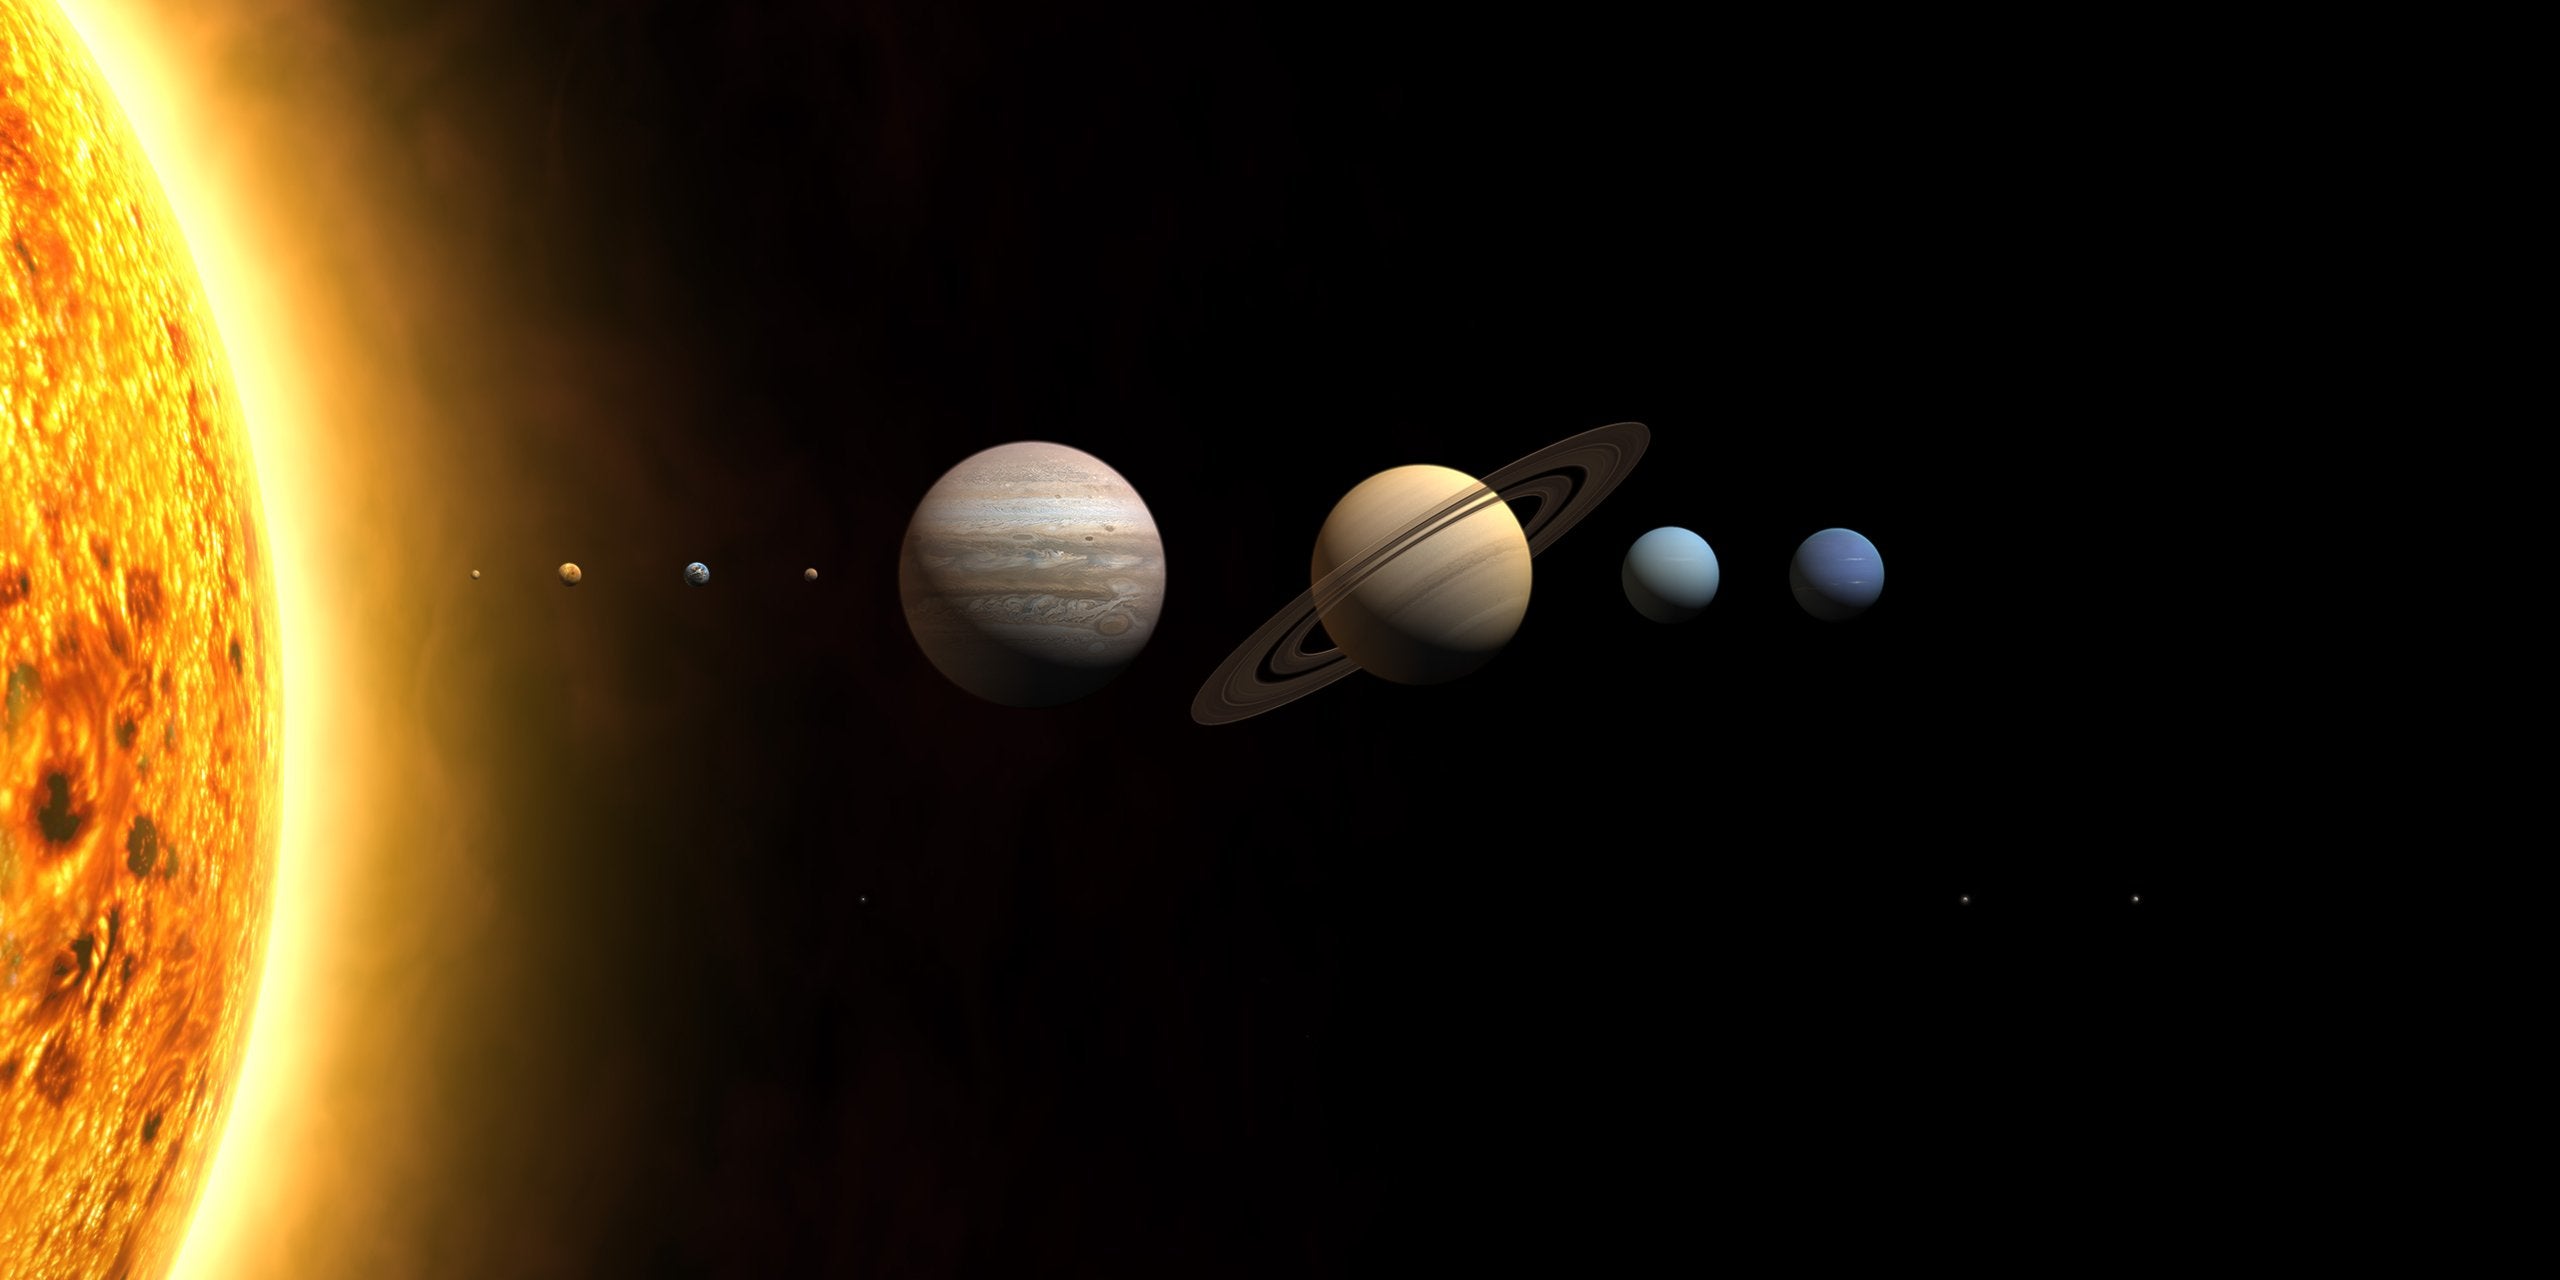 Beautiful photo of the Planets. The Planets & Moons. Sky Image Lab